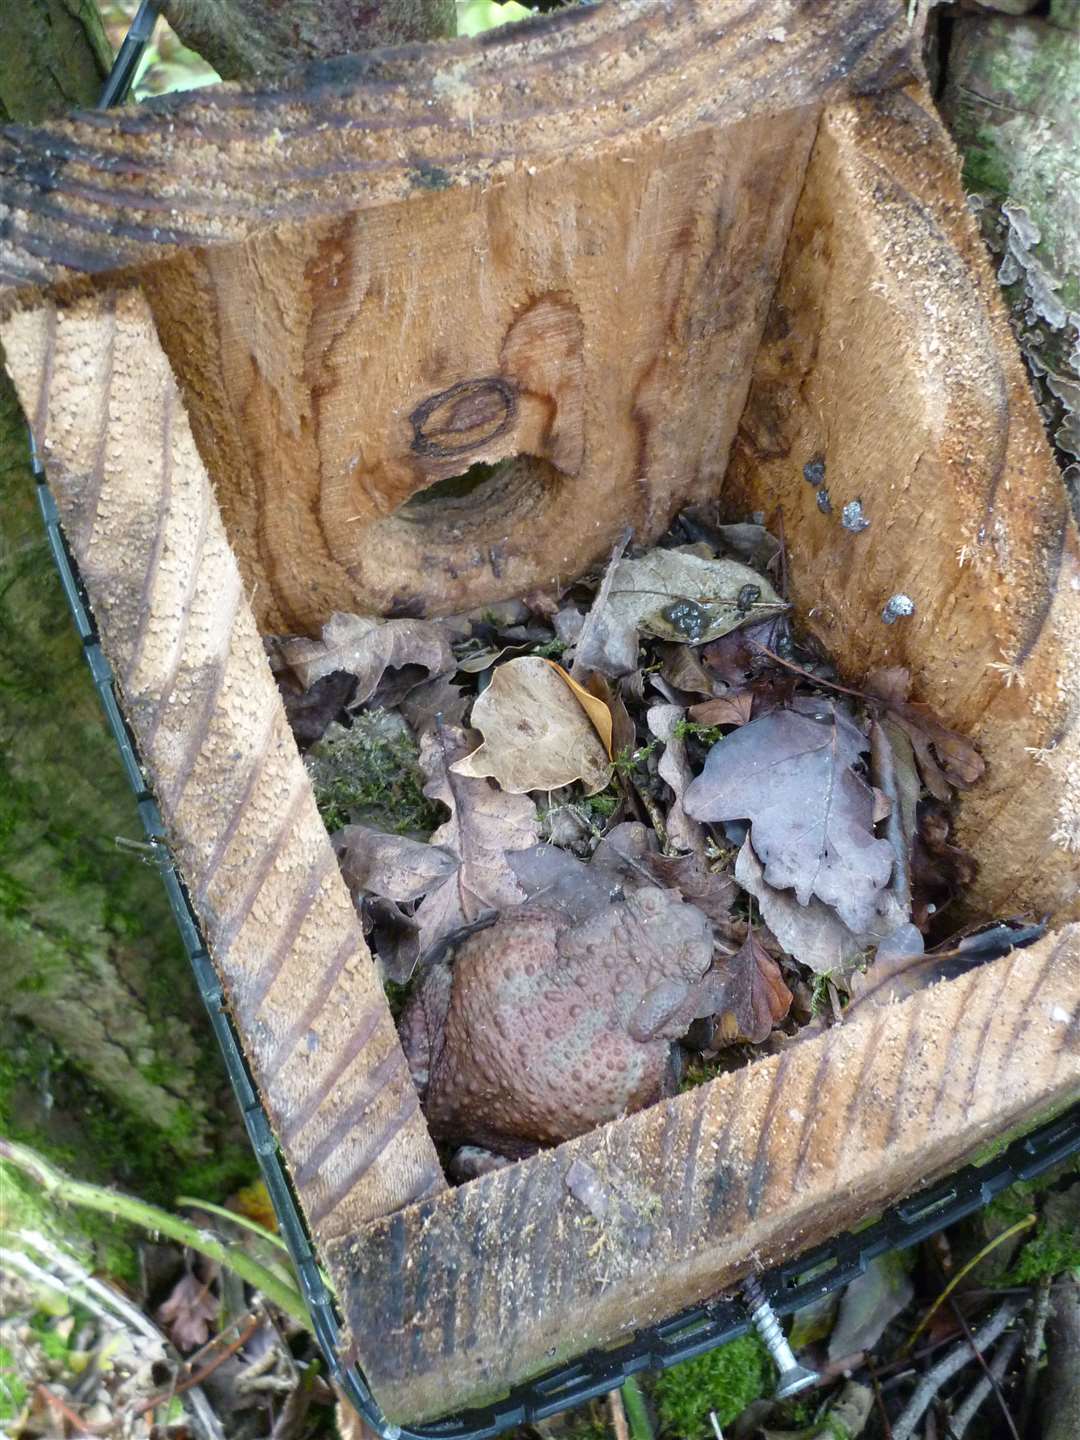 Toads were found inside nest boxes (Froglife/PA)